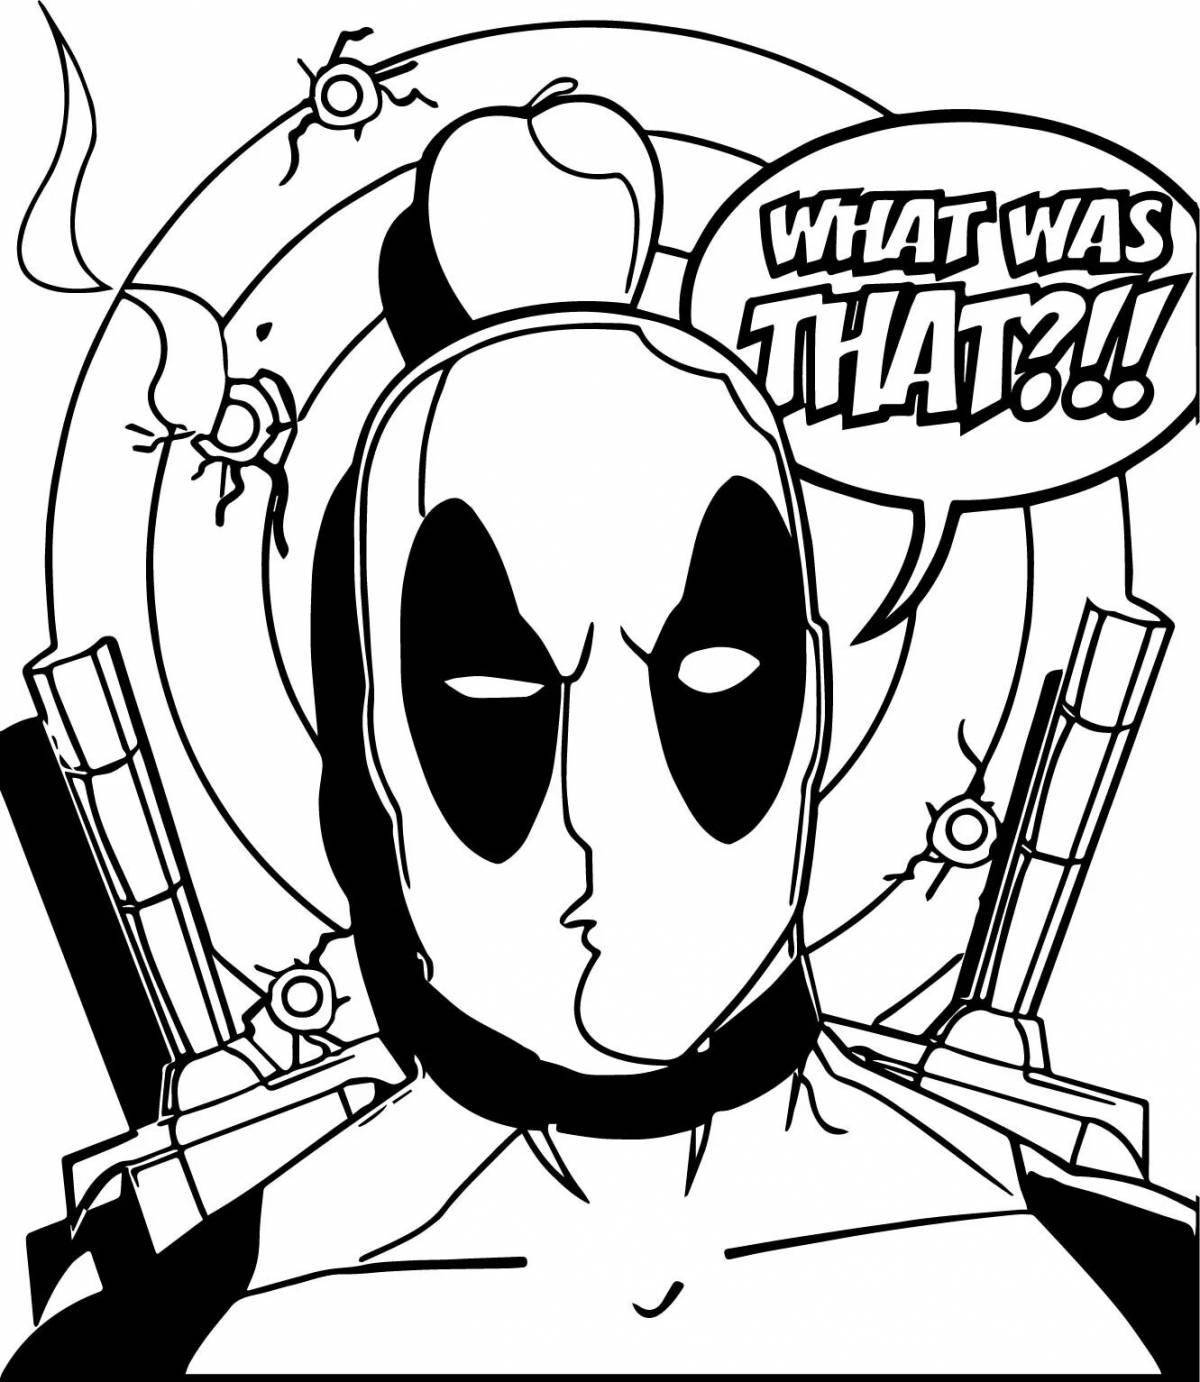 Exciting deadpool coloring book